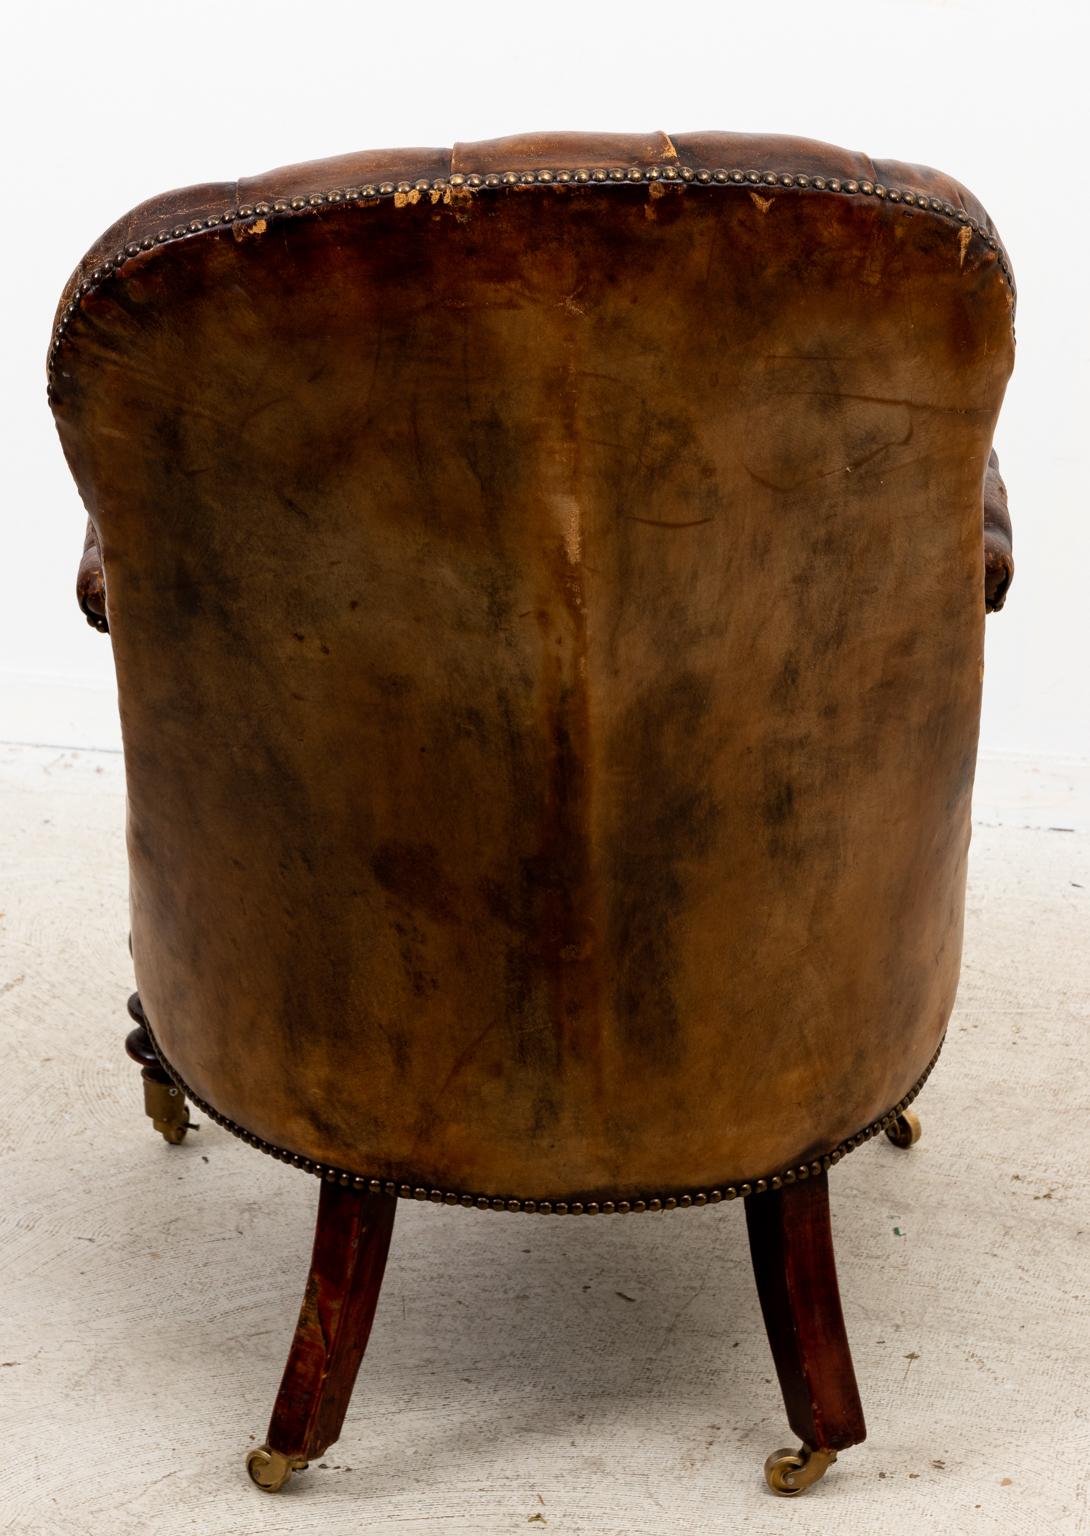 Circa 1830s English tufted leather library chair with carved, scrolled arm hold detail in the William IV style on castors. Made in England. Please note wear consistent with age.